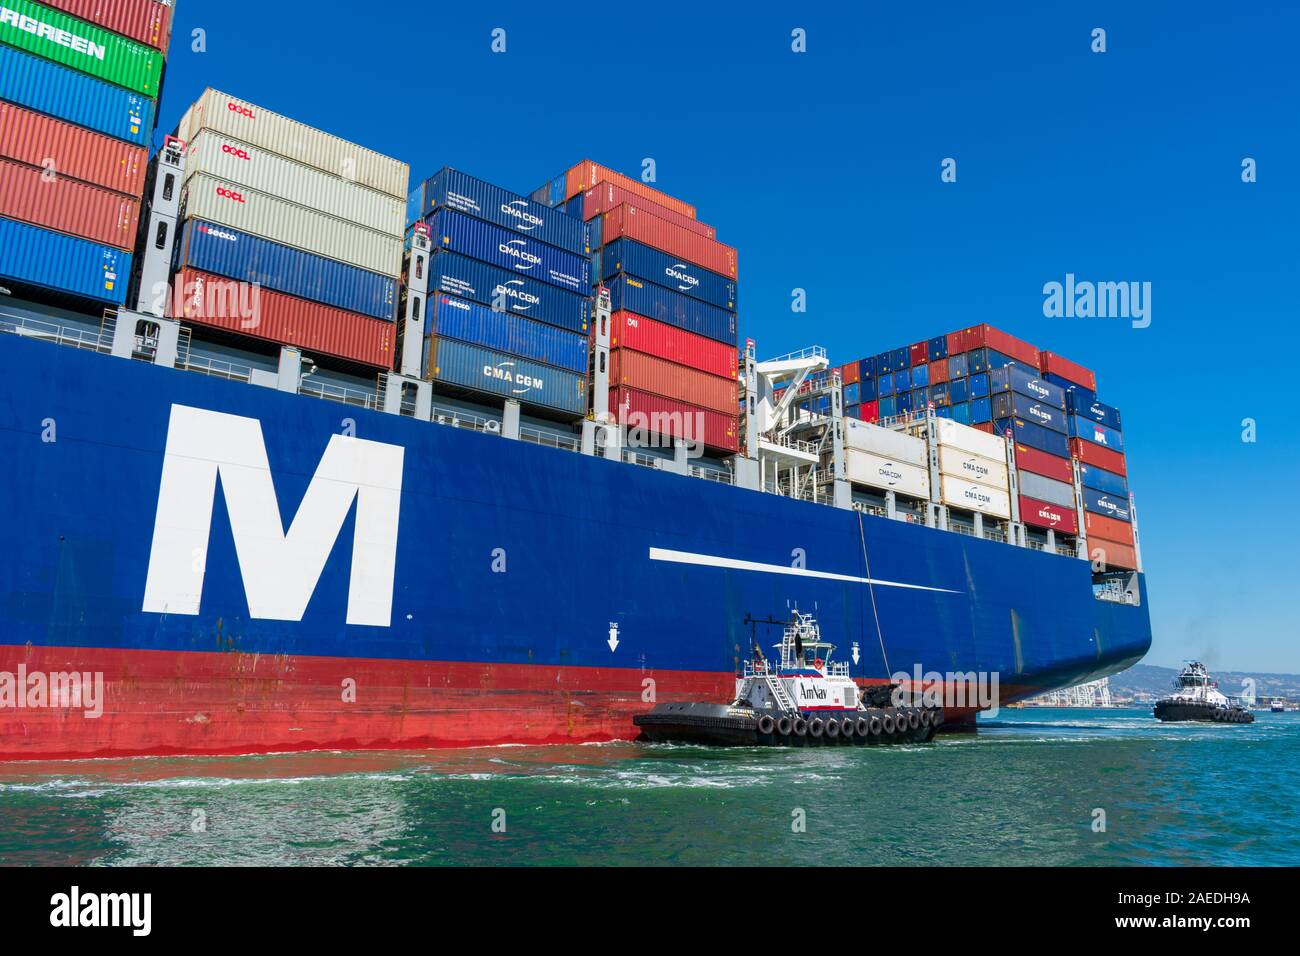 Tugboat assists container ship CMA CGM out of the Port of Oakland under blue sky. A tugboat maneuvers vessel by pushing, pulling or towing containersh Stock Photo